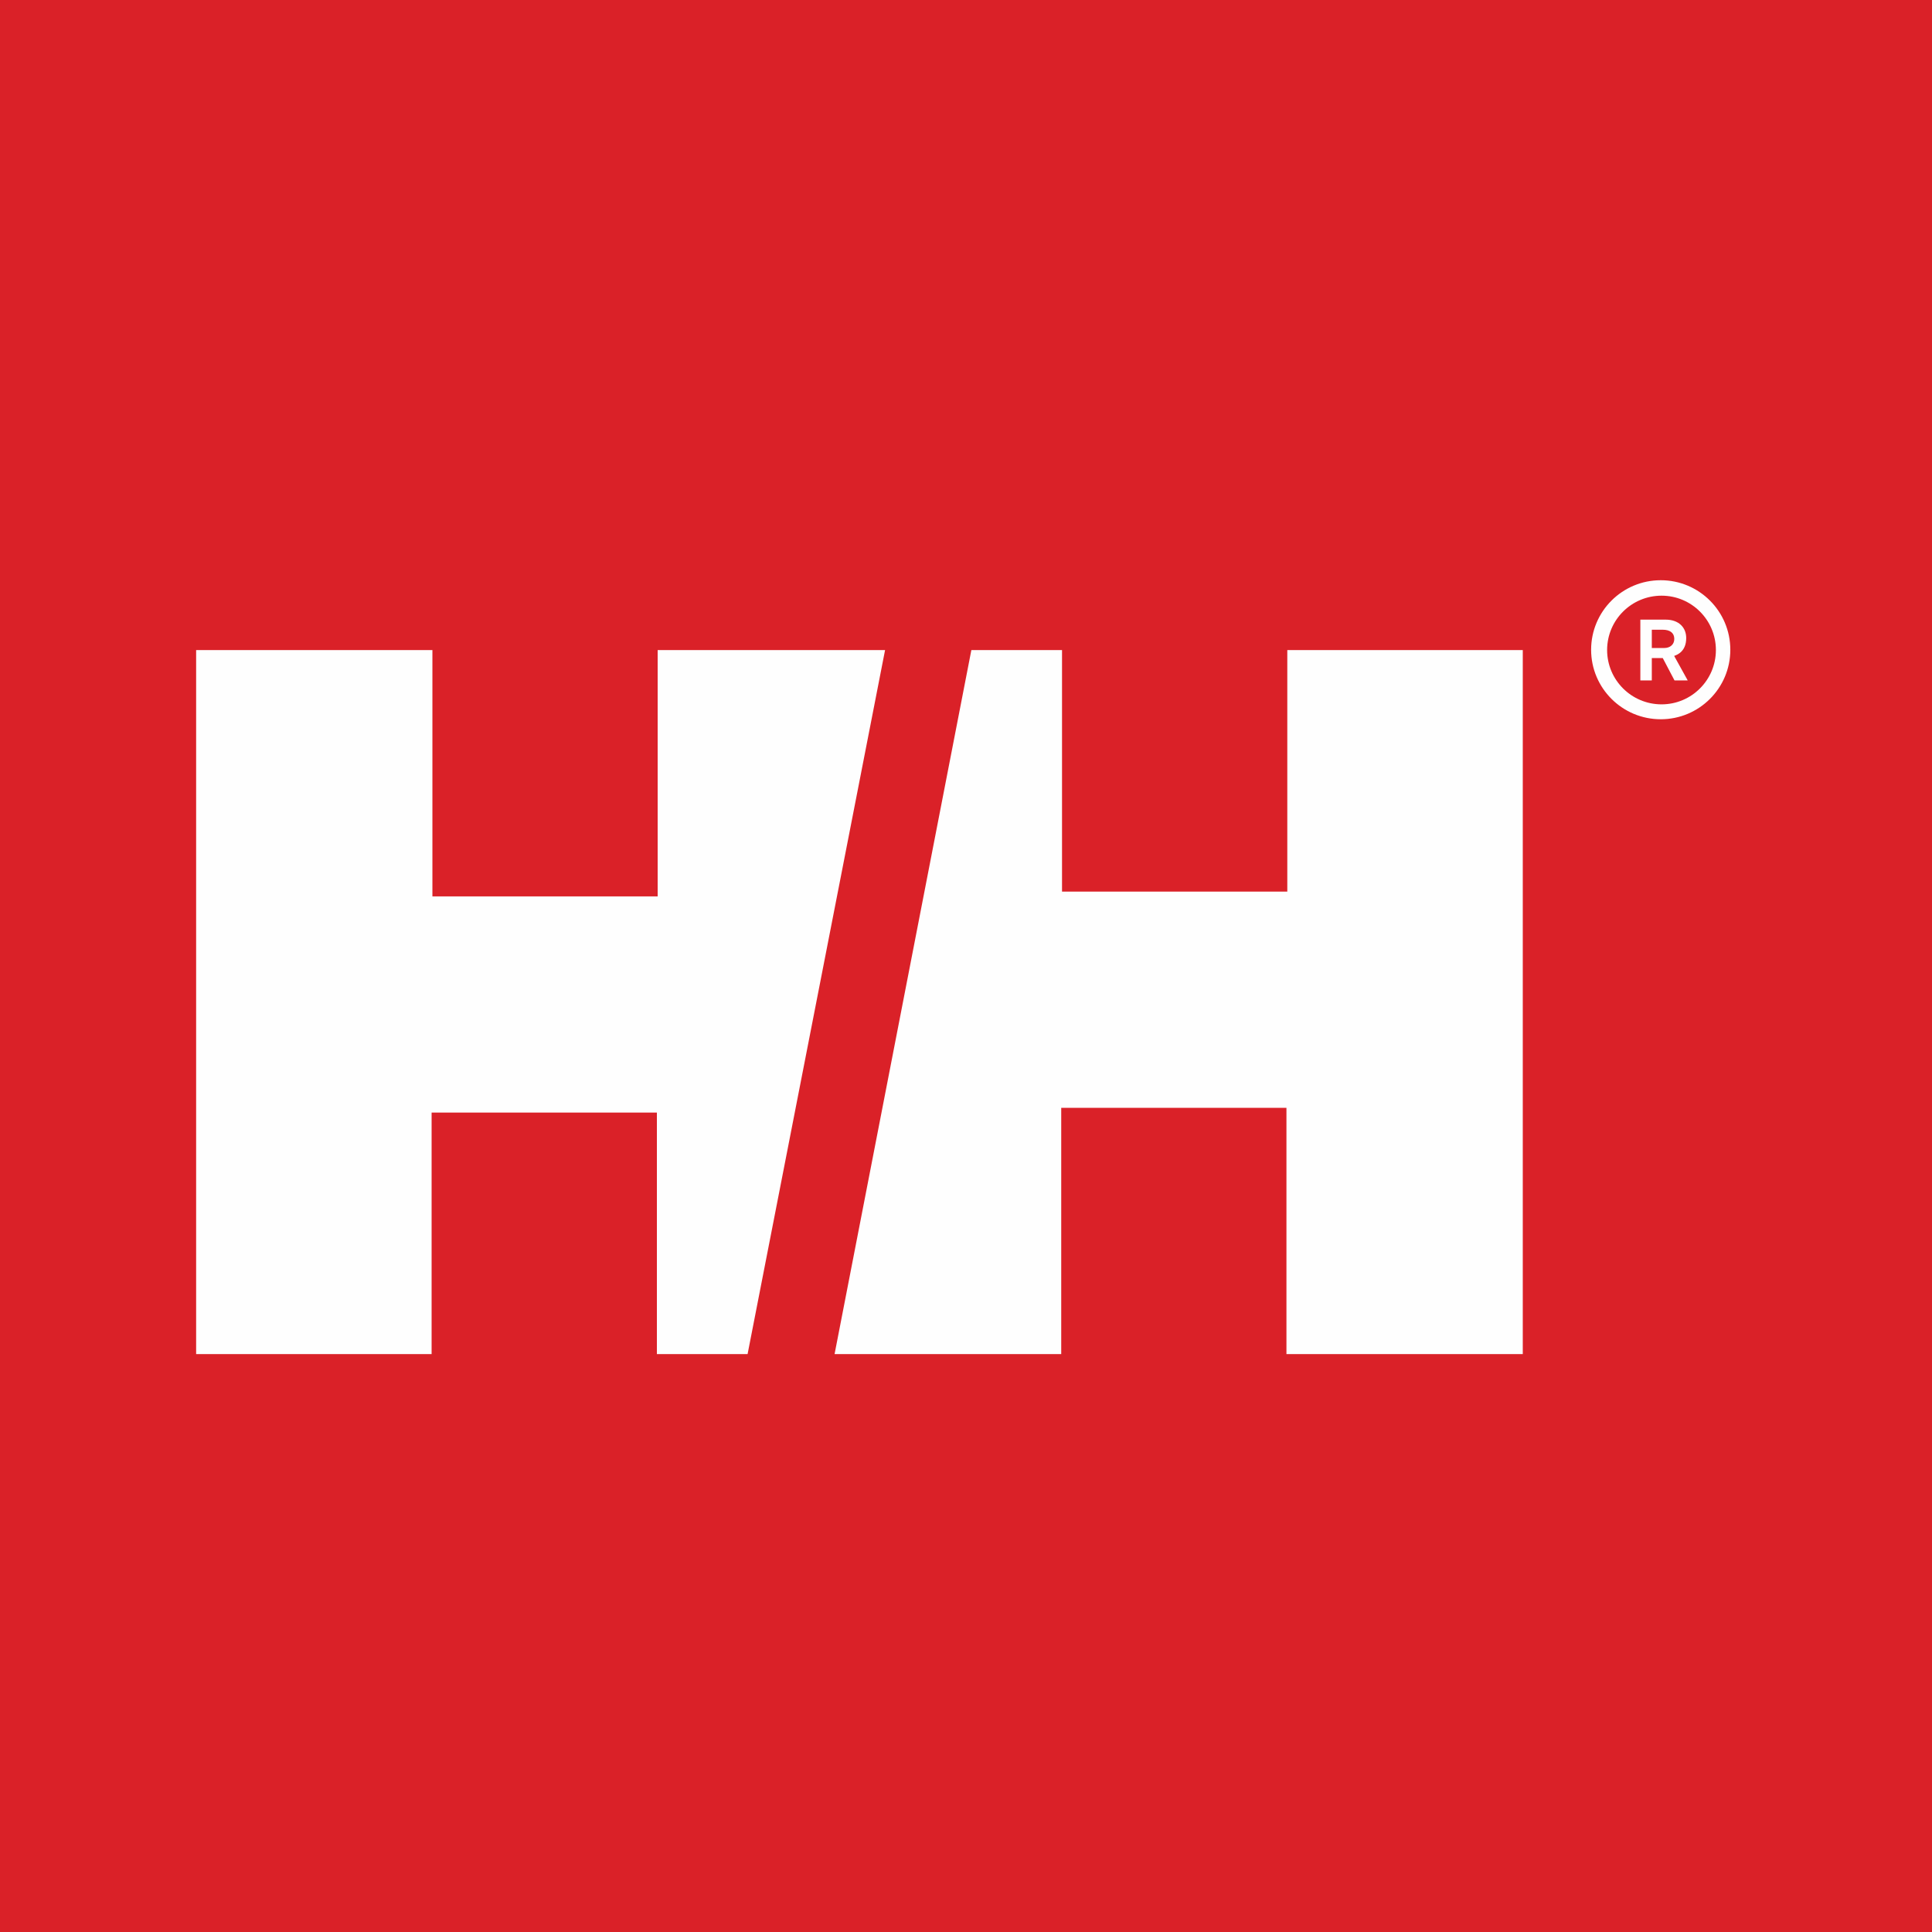 Helly Hansen Coupons & Promo Codes